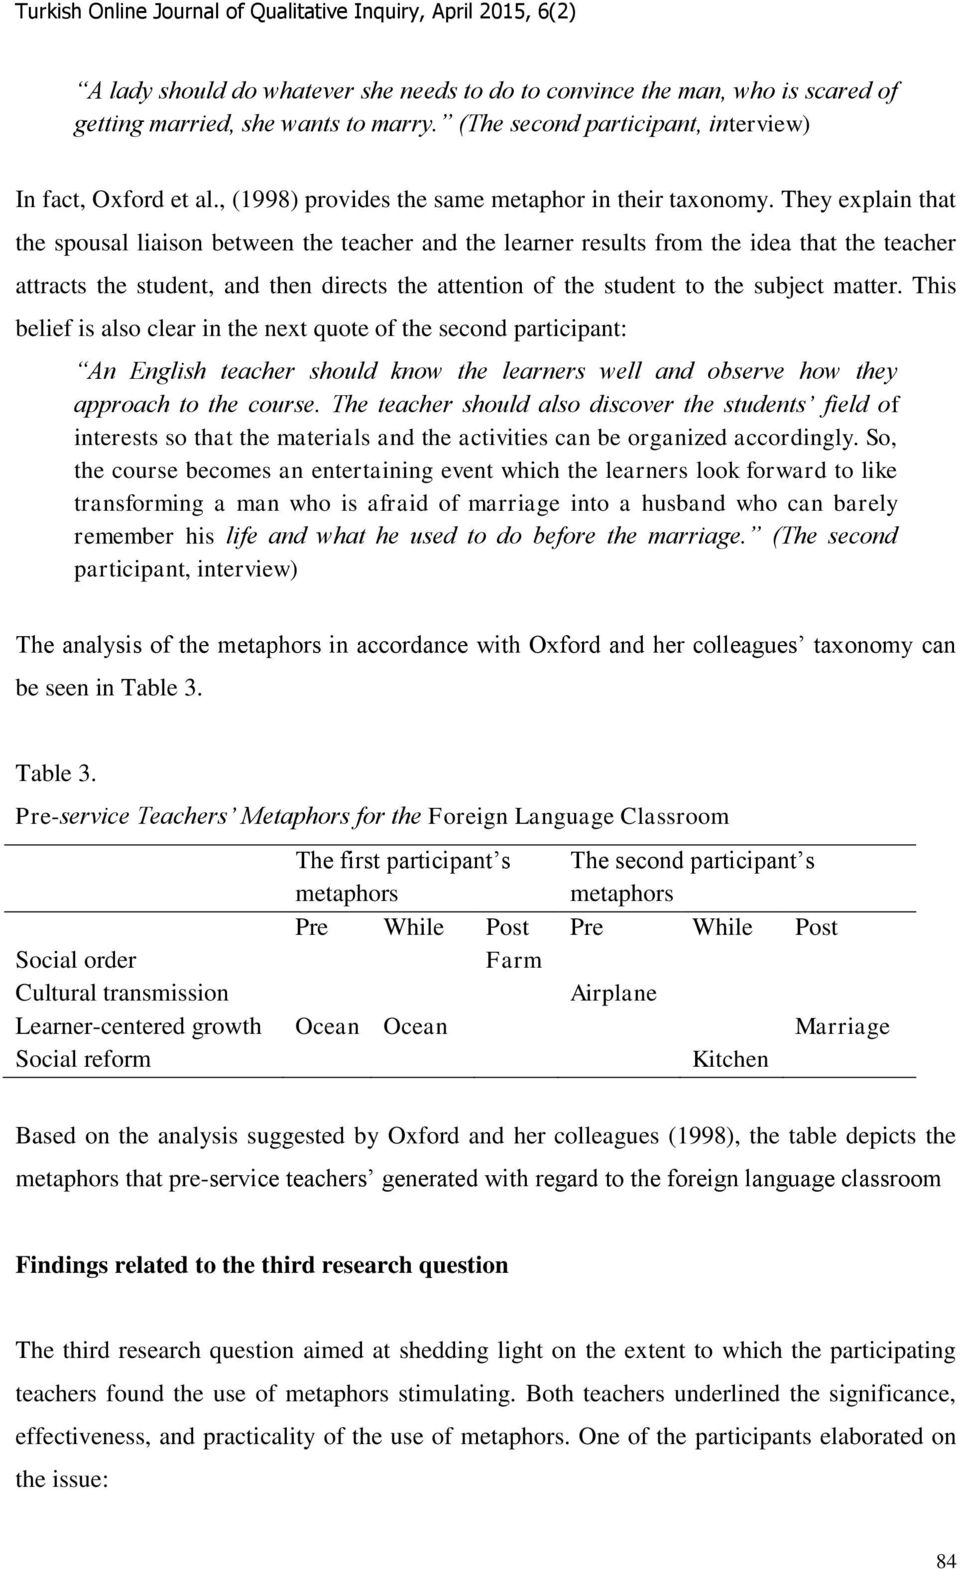 They explain that the spousal liaison between the teacher and the learner results from the idea that the teacher attracts the student, and then directs the attention of the student to the subject